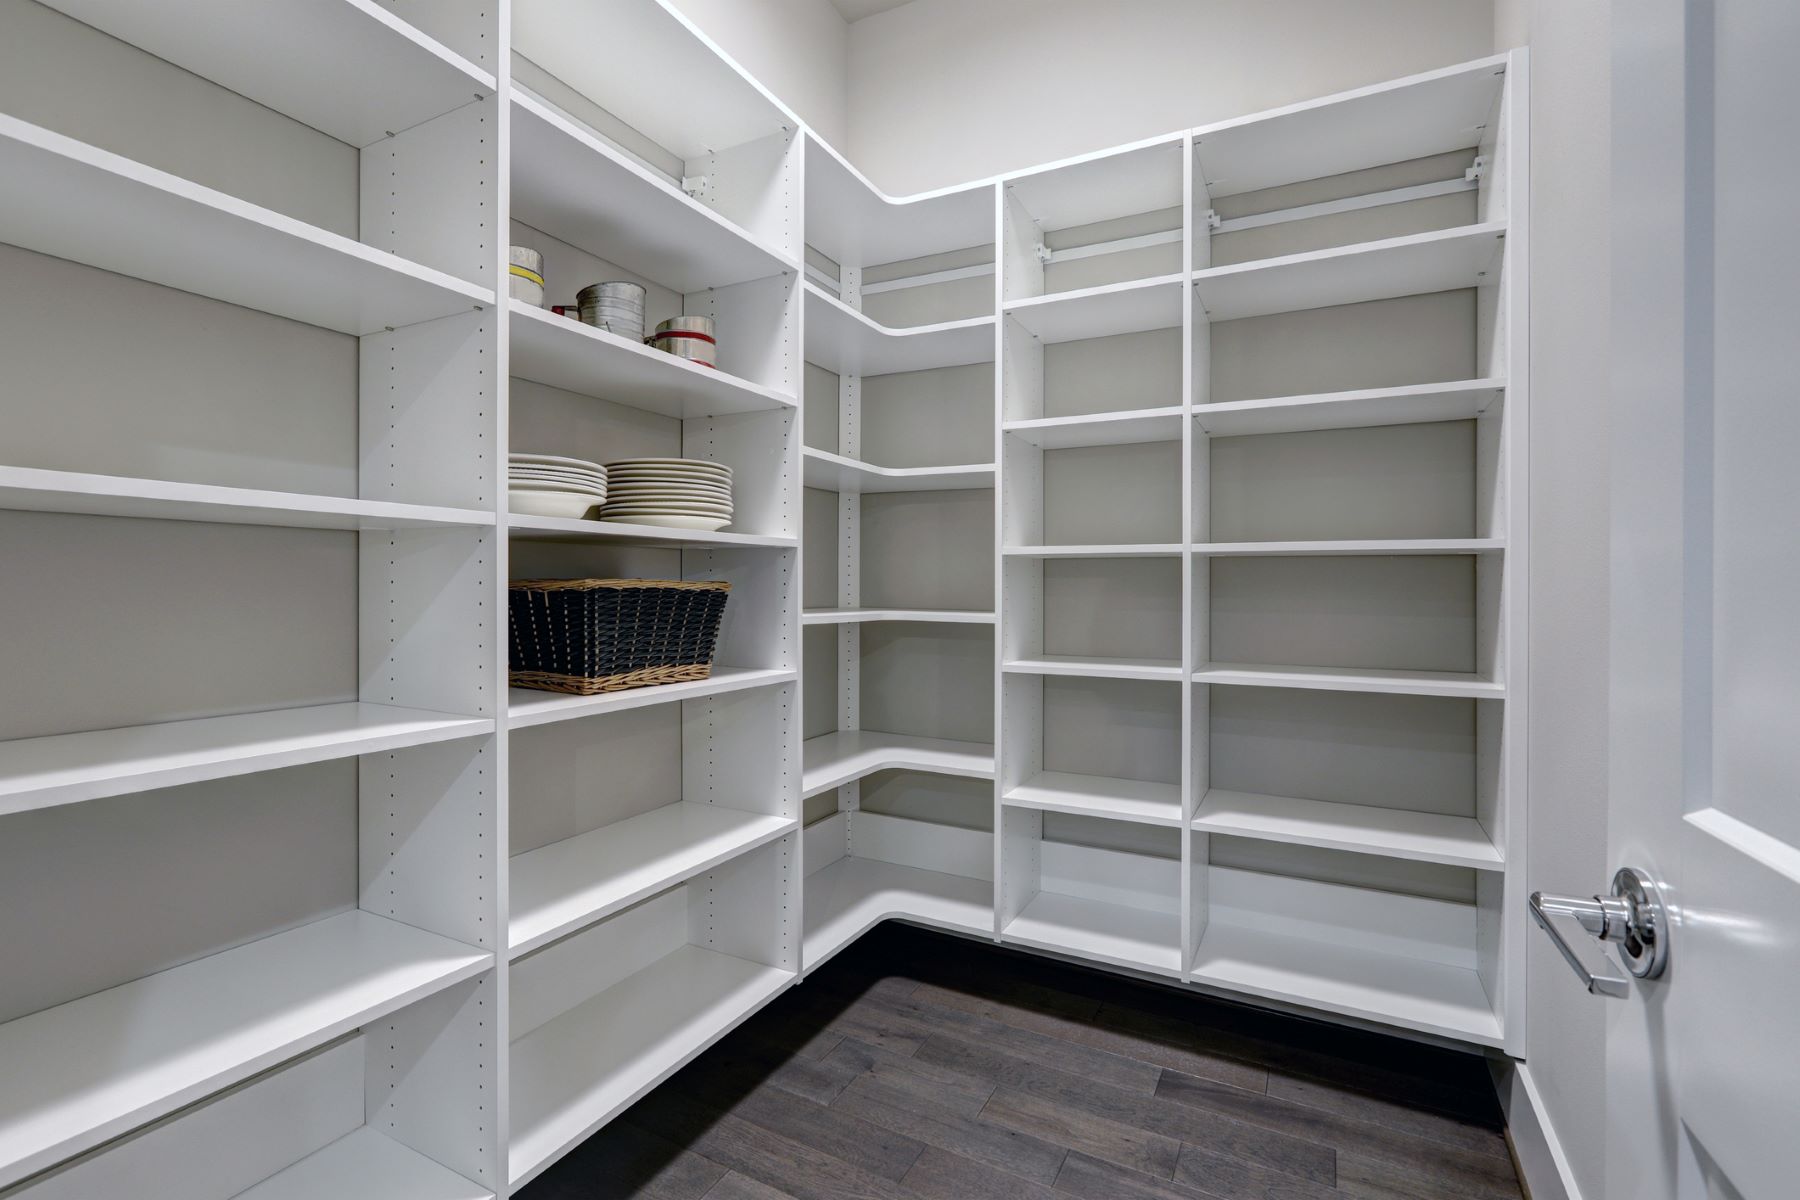 Pantry Shelving Installation, Pantry Shelving Systems